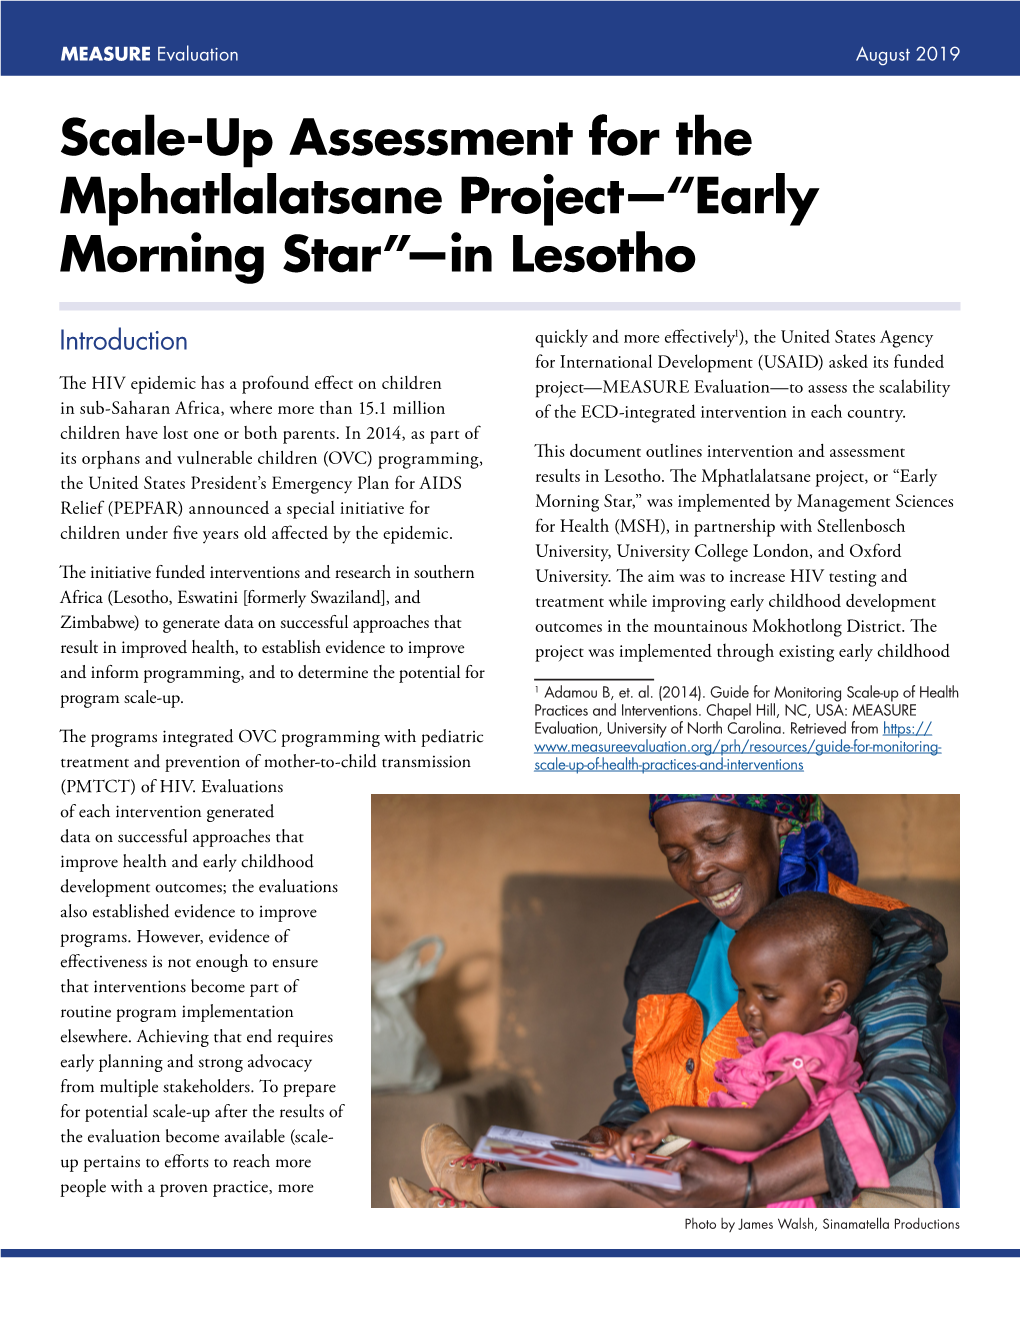 Scale-Up Assessment for the Mphatlalatsane Project—“Early Morning Star”—In Lesotho